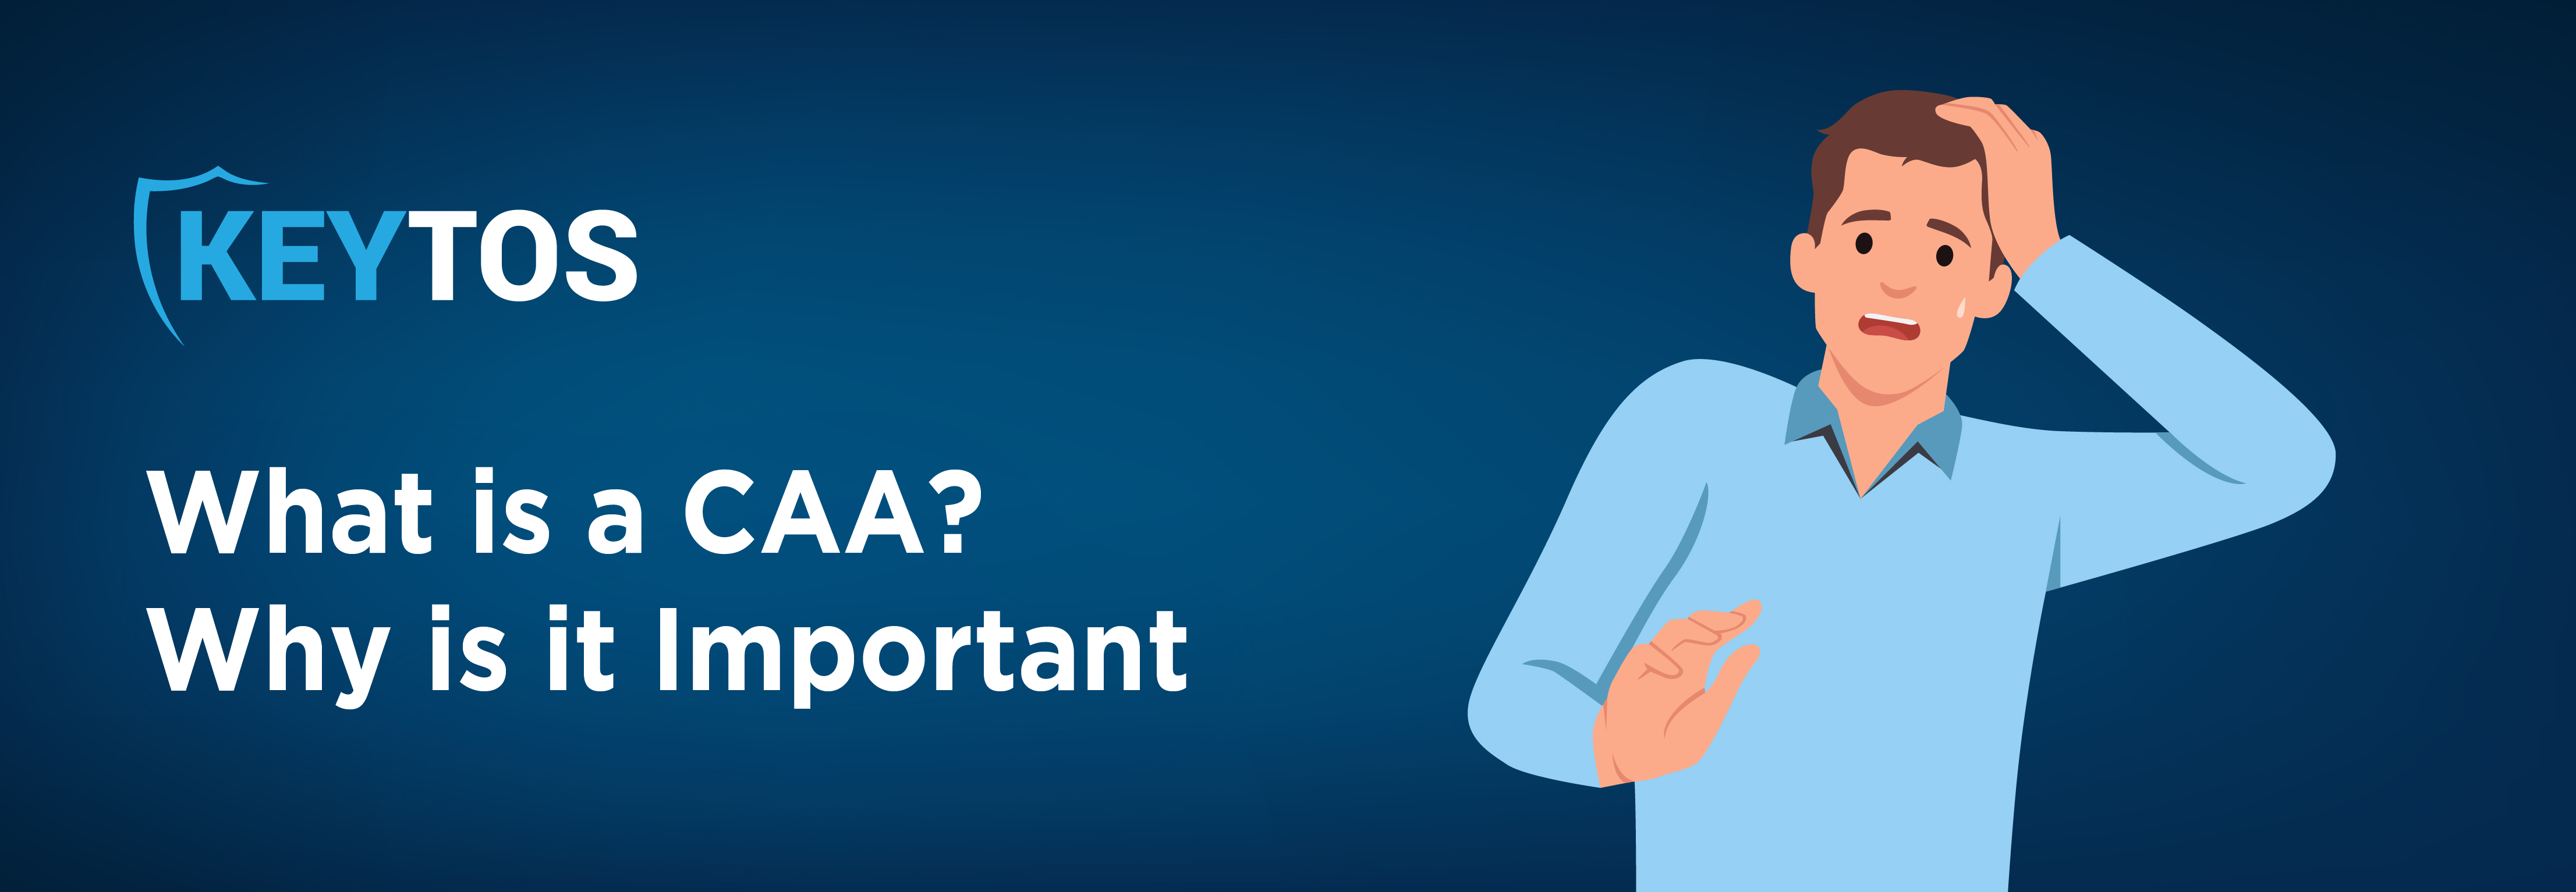 What is a Certificate Authority Authorization? Why is a CAA Important?